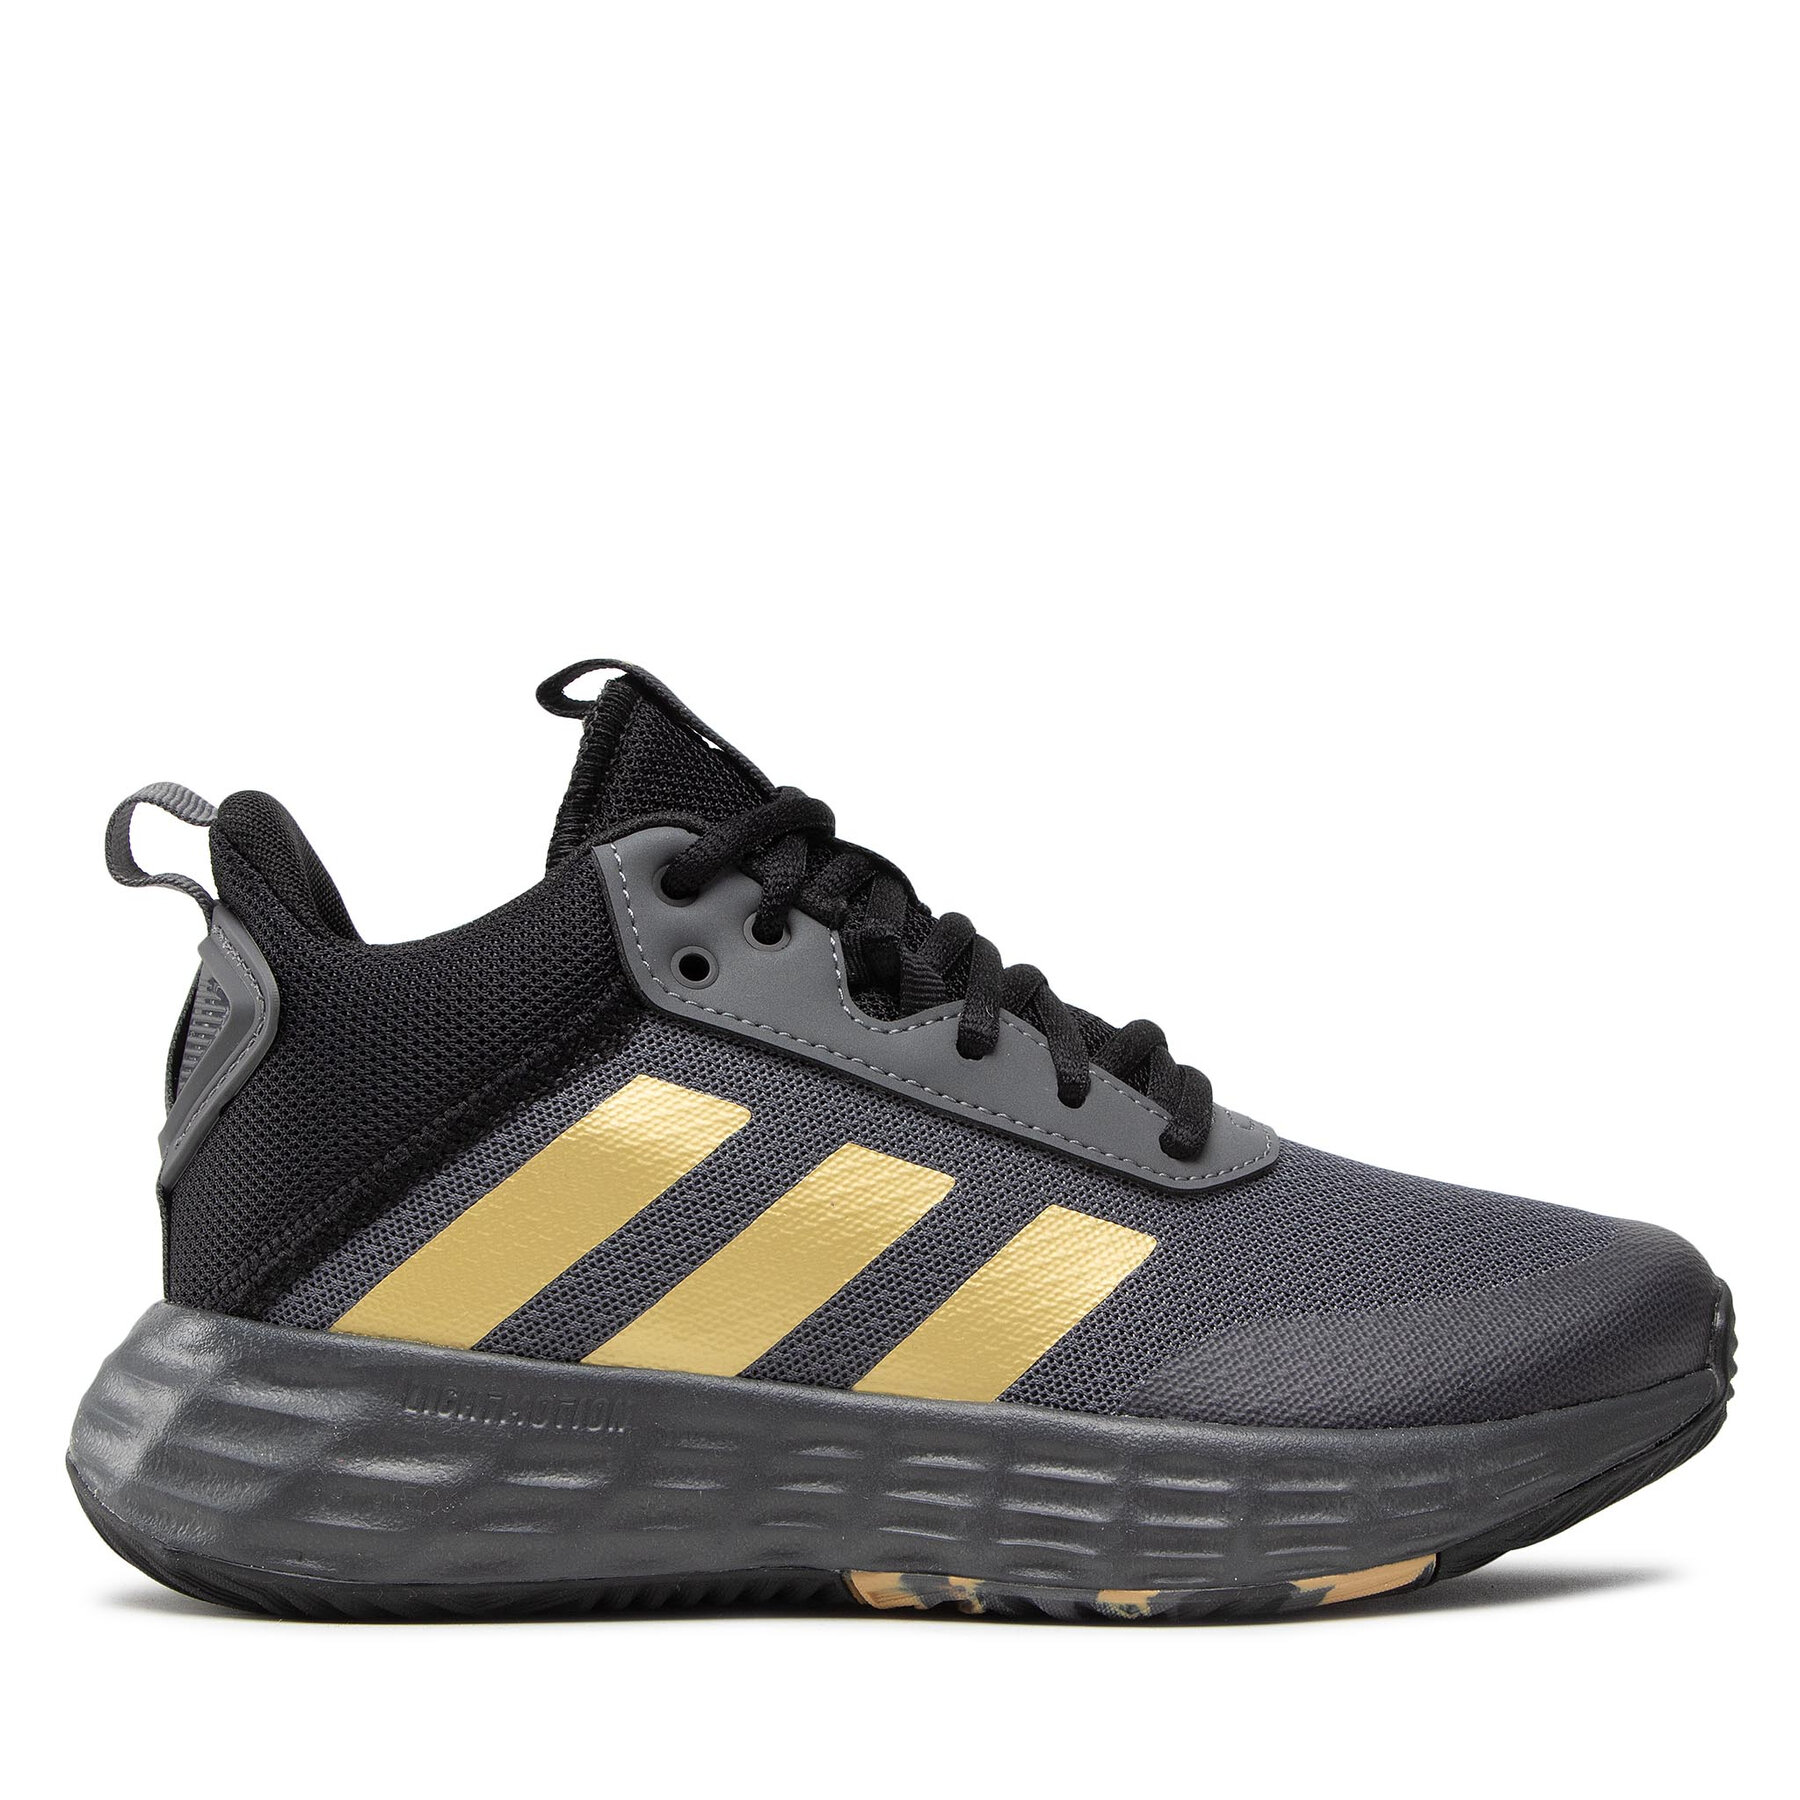 Sneakers adidas Ownthegame 2.0 K GZ3381 Grå